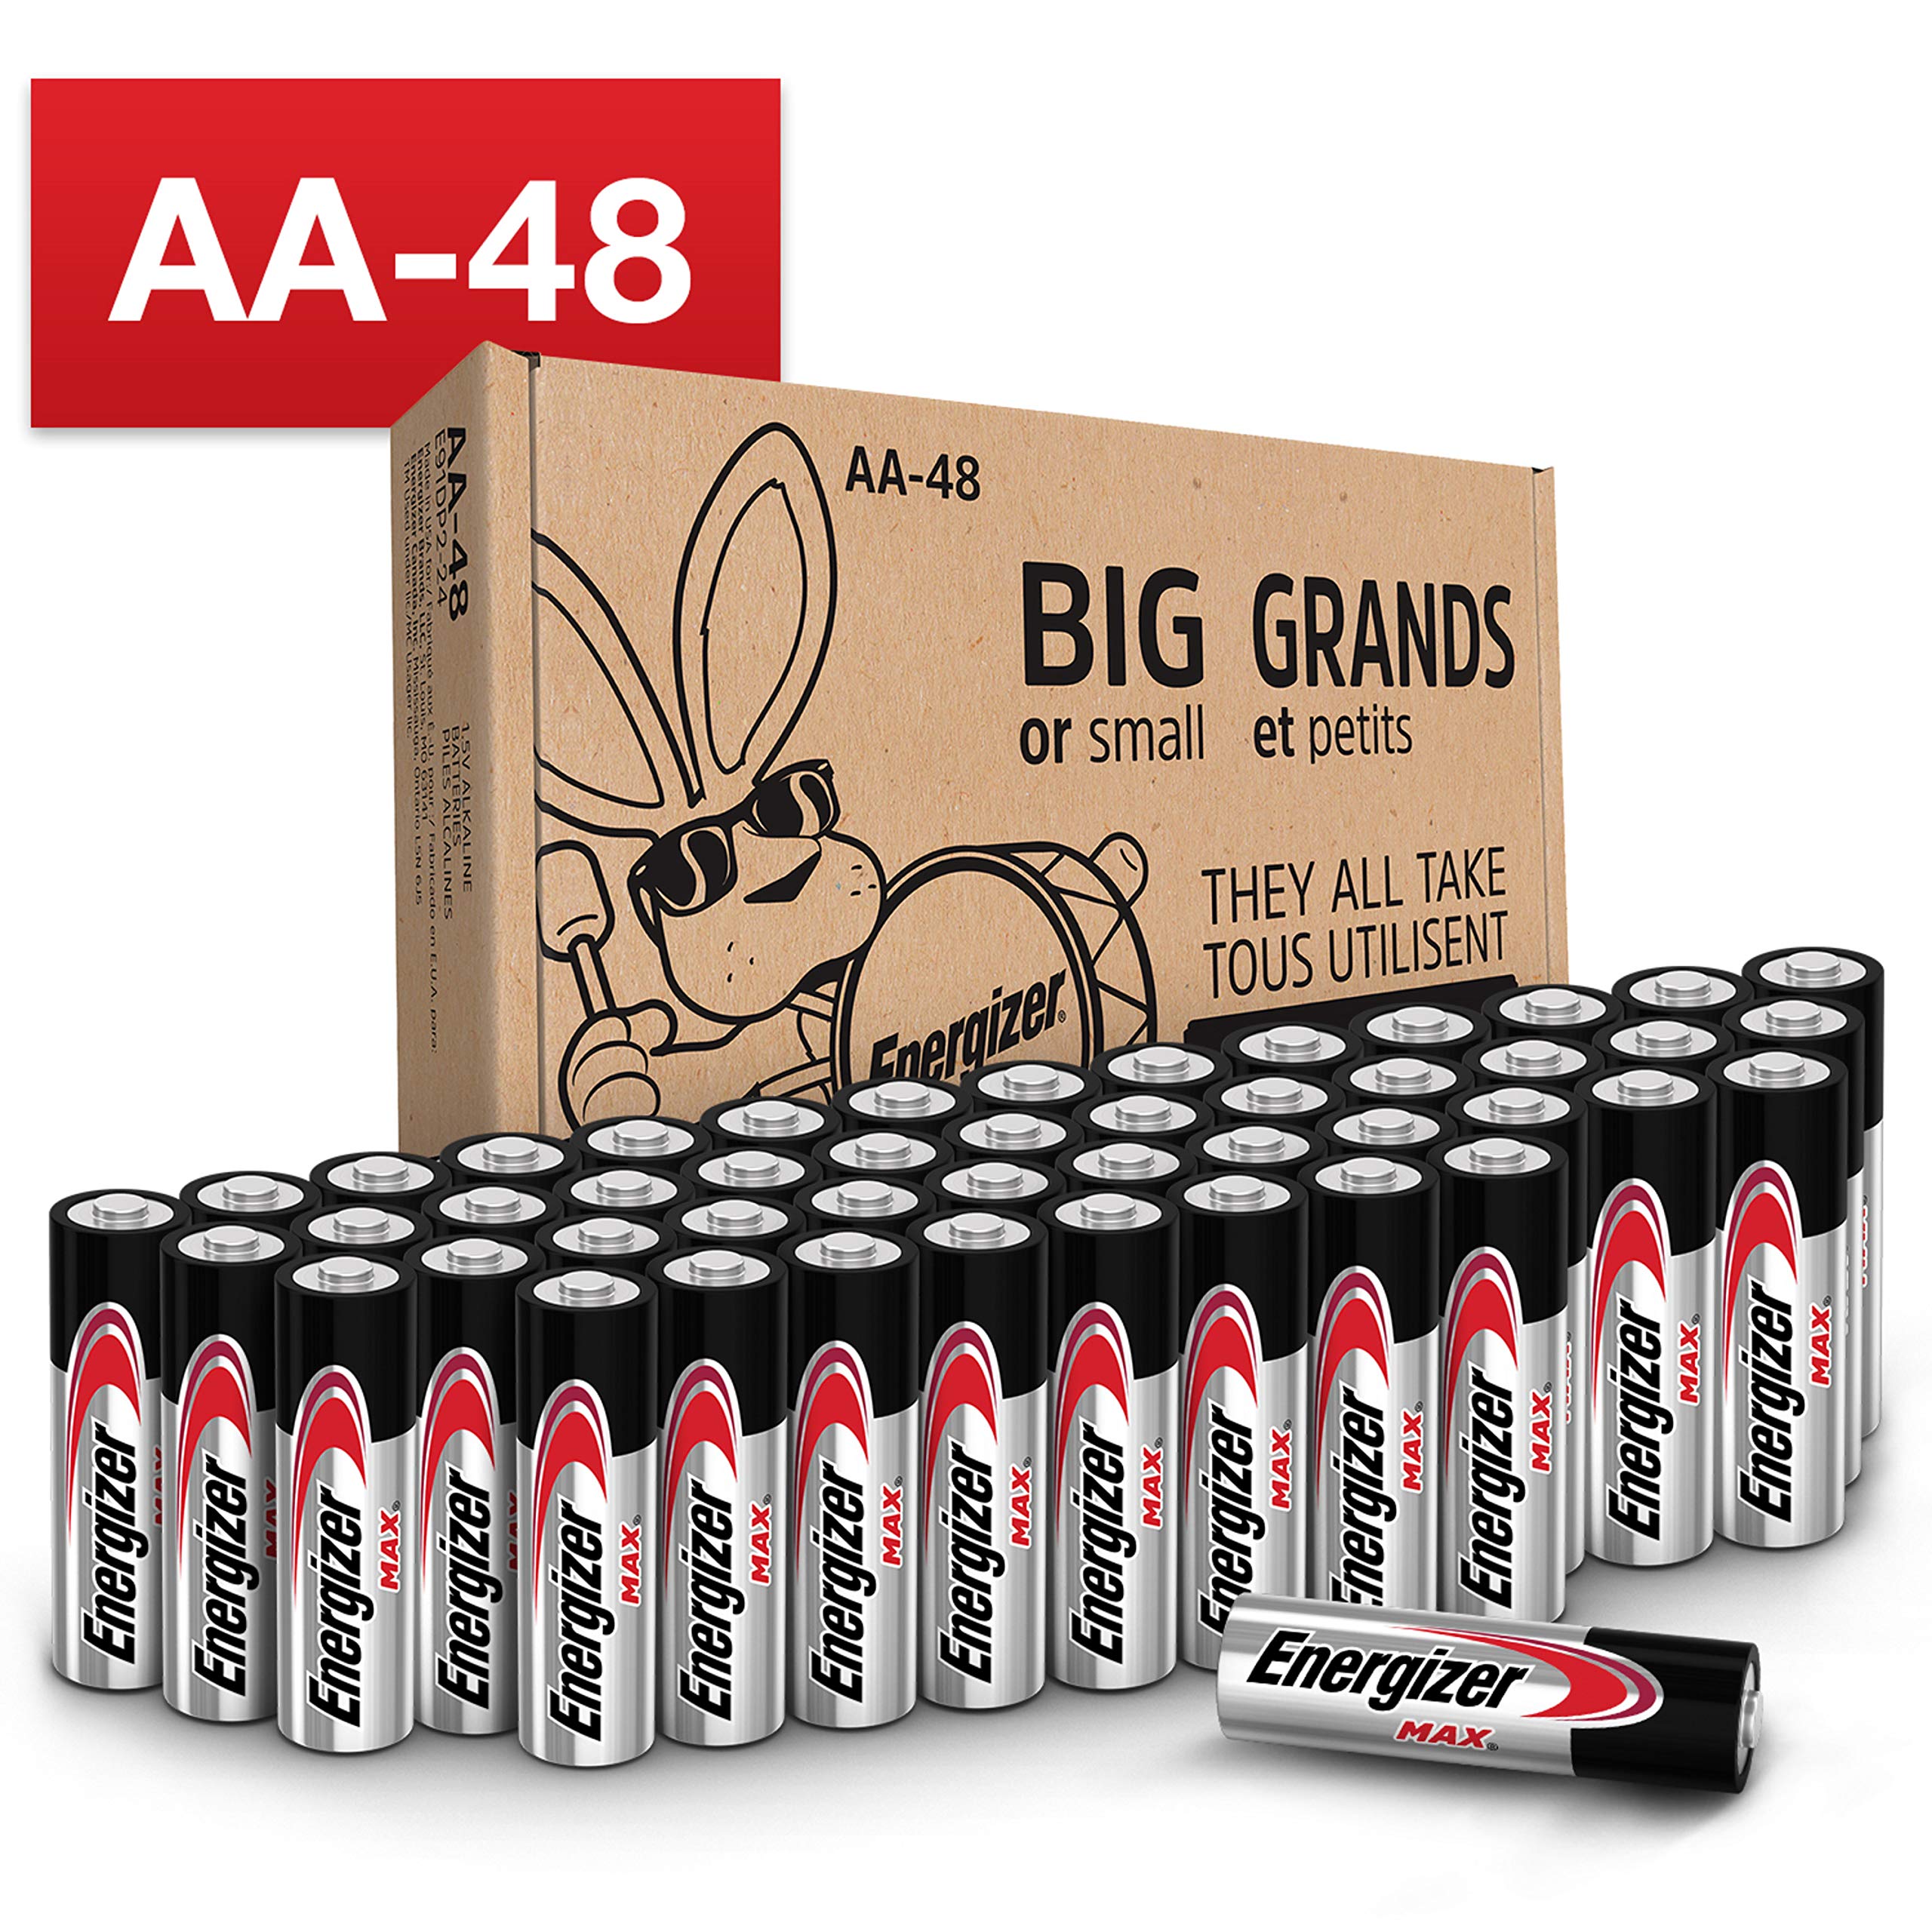 Energizer AA Batteries, Max Double A Battery Alkaline, 48 Count